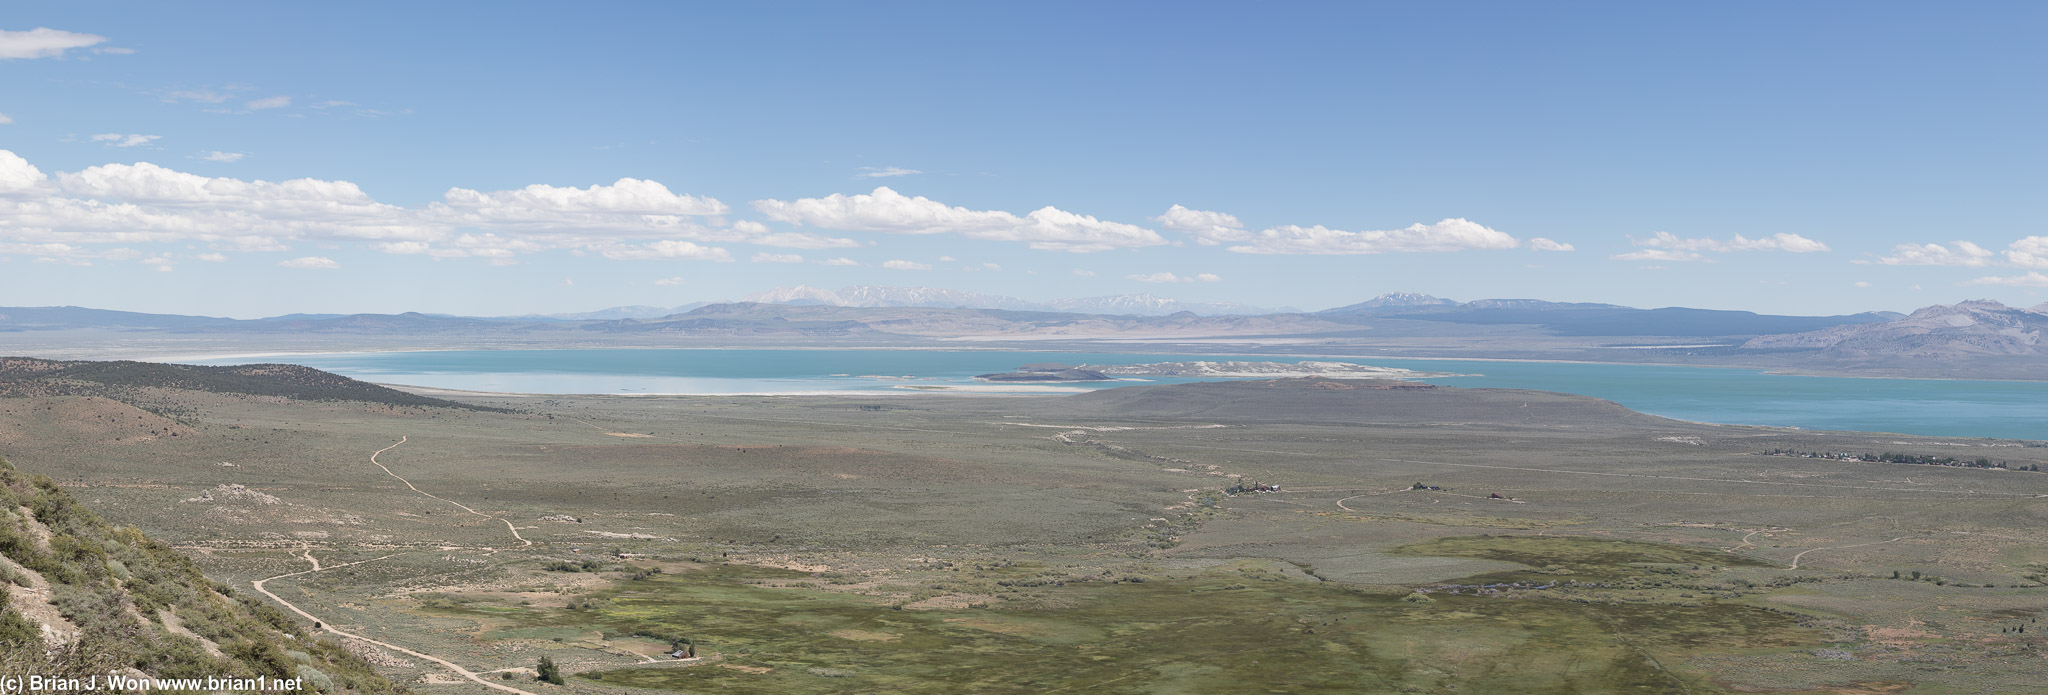 Panoramic shot of Mono Lake from the nearby vista point.